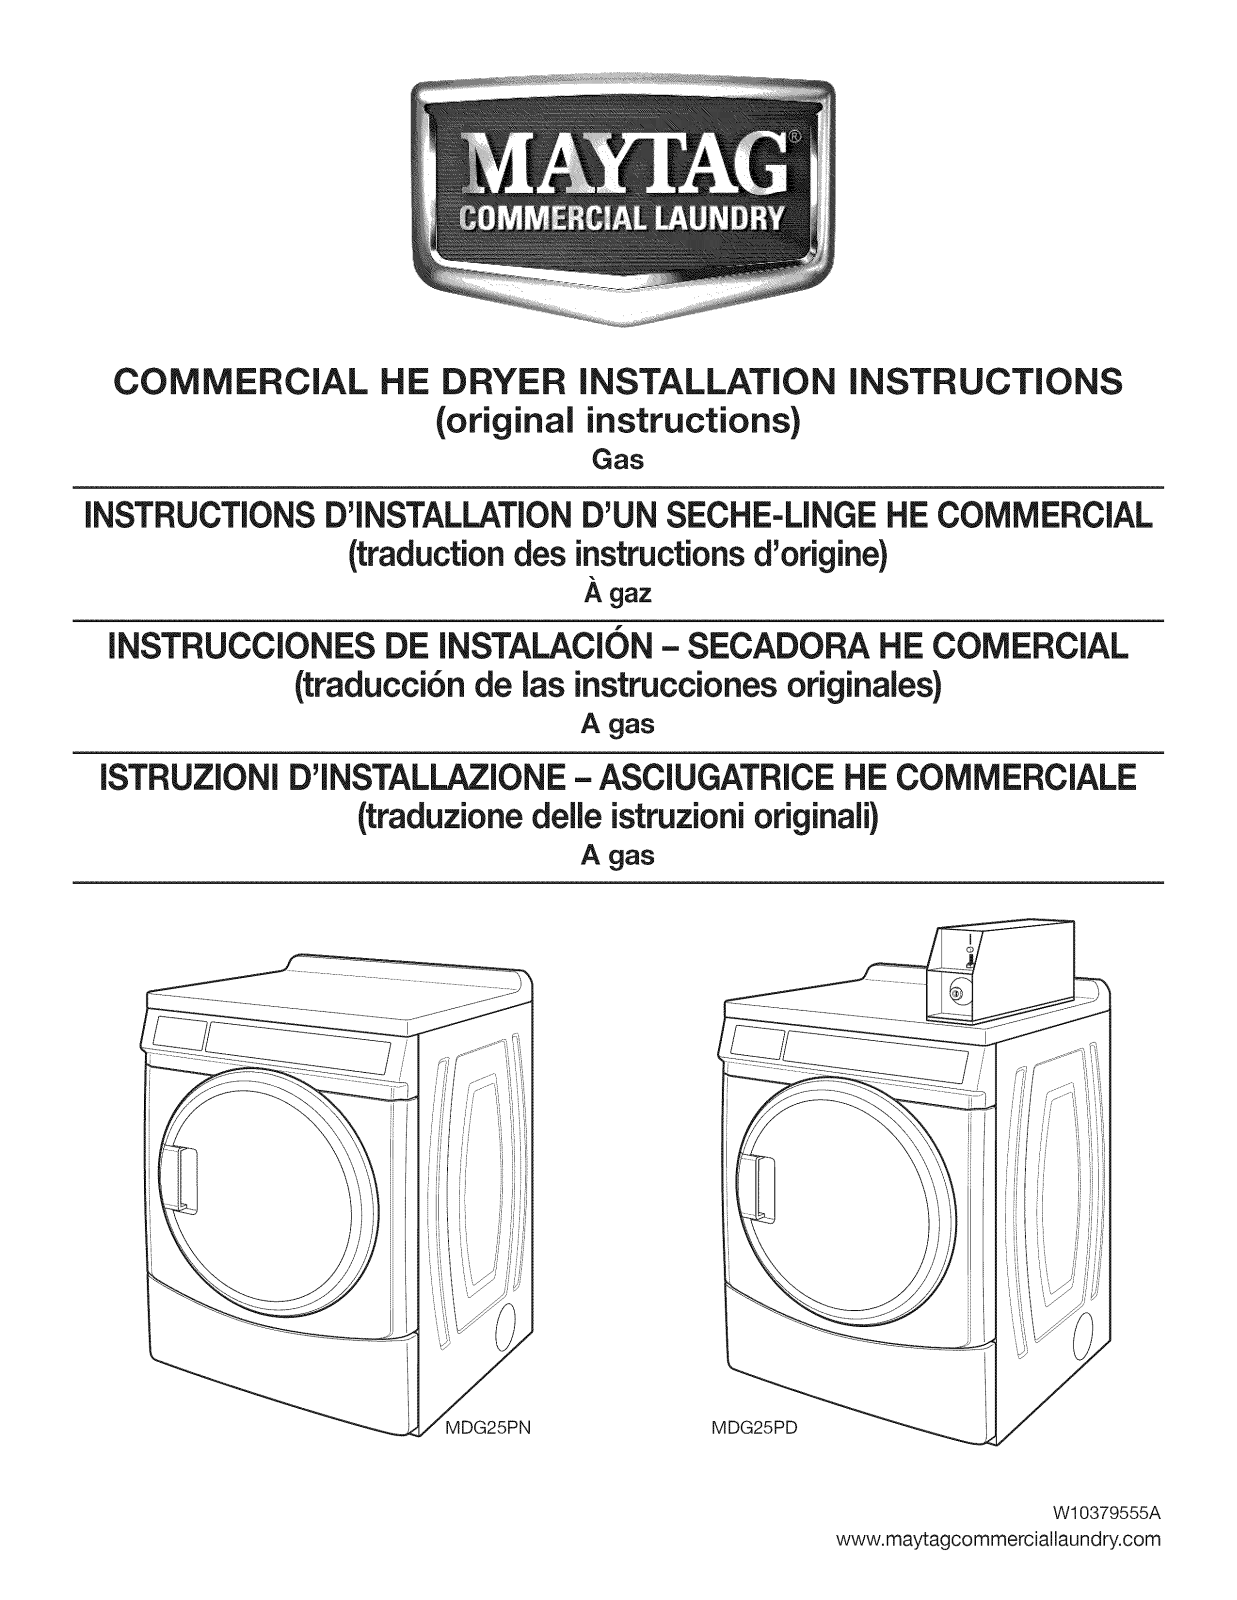 Maytag MLG24PNAGW4, MLG24PNAGW2, MDG25PNAGW3, MDG25PDAGW2, MDG25PDAGW3 Installation Guide